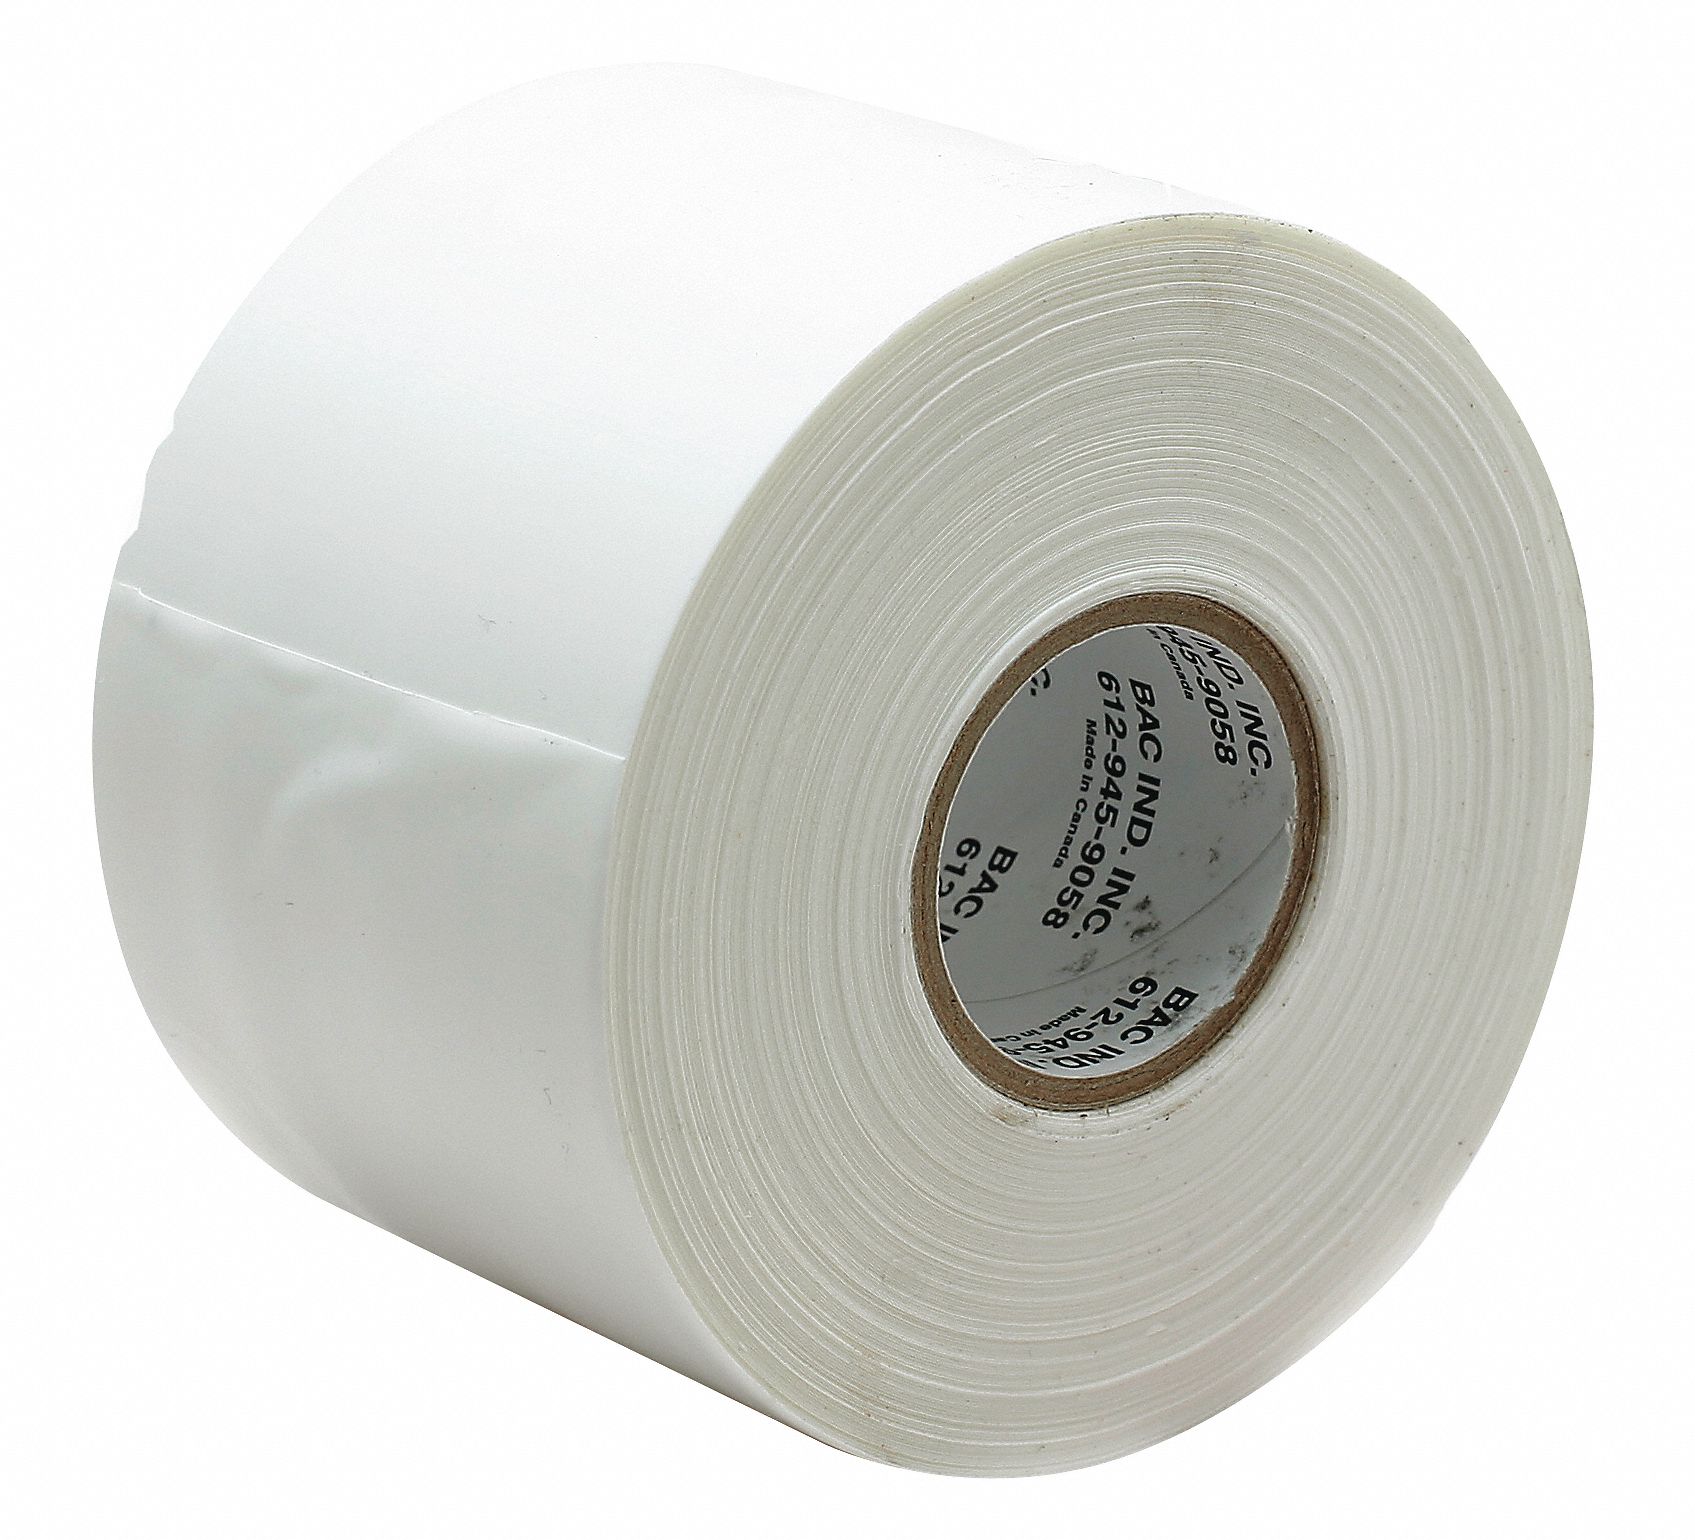 Duct Tape: BAC INDUSTRIES, Series TW, 3 in x 36 yd, White, Continuous Roll, Pack Qty: 1